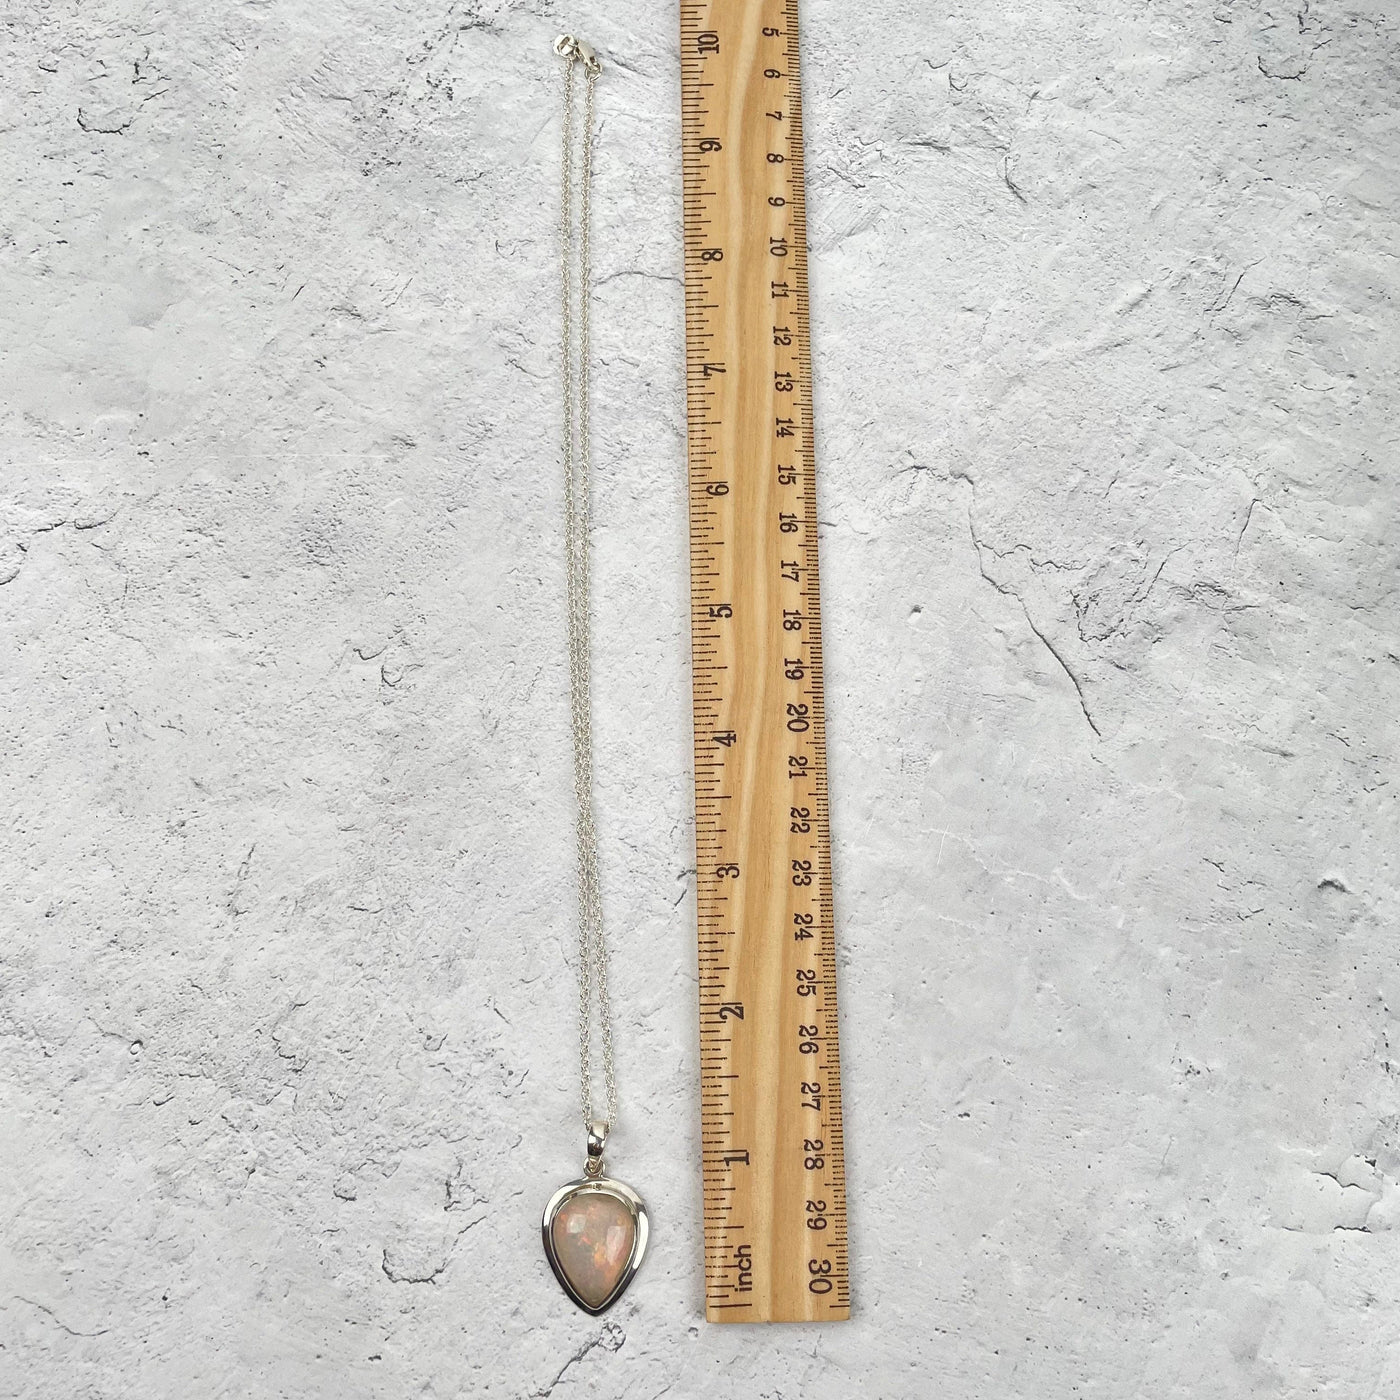 necklace next to a ruler for size reference. comes on an 18" long necklace 